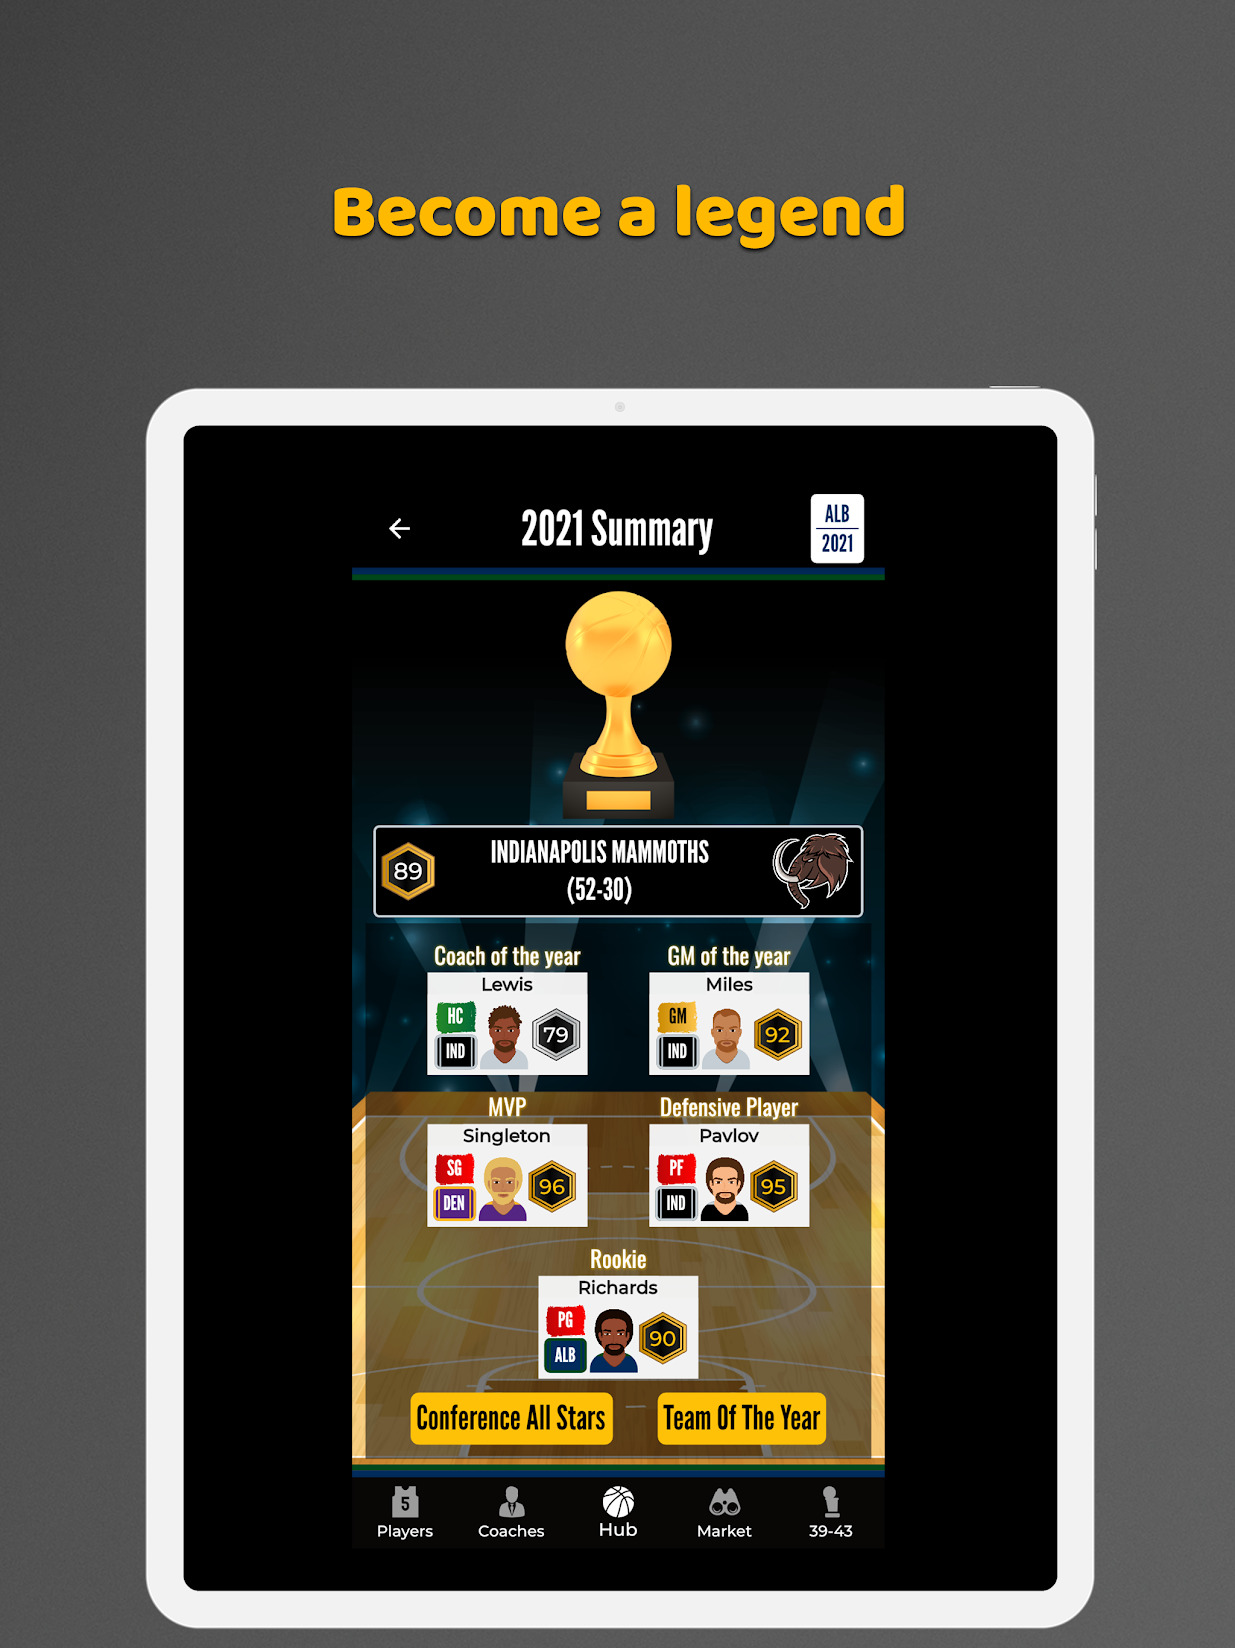 Ultimate Basketball GM (Android, iPhone, iPad iOS)